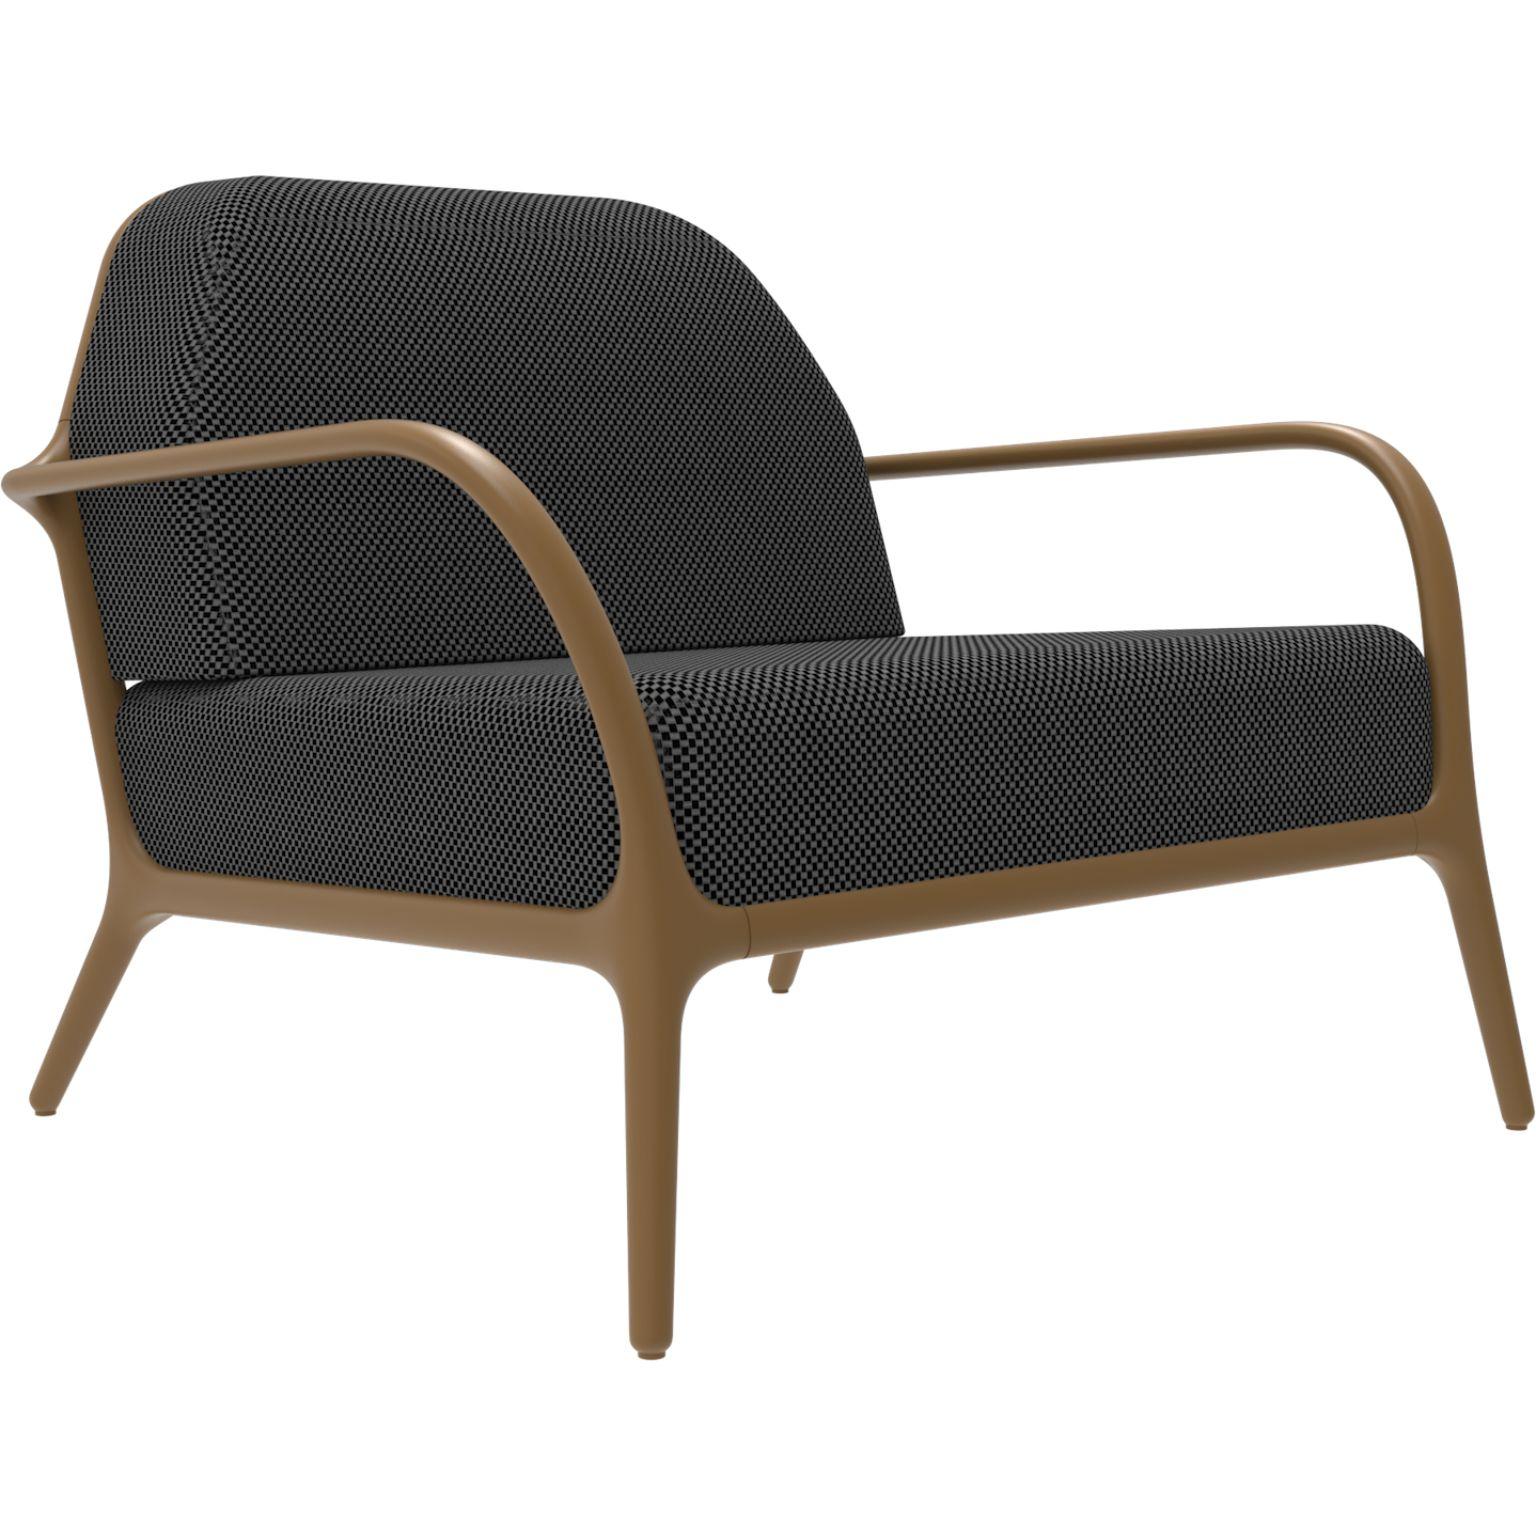 Xaloc Gold Amchair by MOWEE
Dimensions: D 100 x W 102 x H 81 cm (Seat Height 42 cm)
Material: Aluminum, Upholstery
Weight: 29 kg
Also available in different colours and finishes. Please contact us.

 Xaloc synthesizes the lines of interior furniture